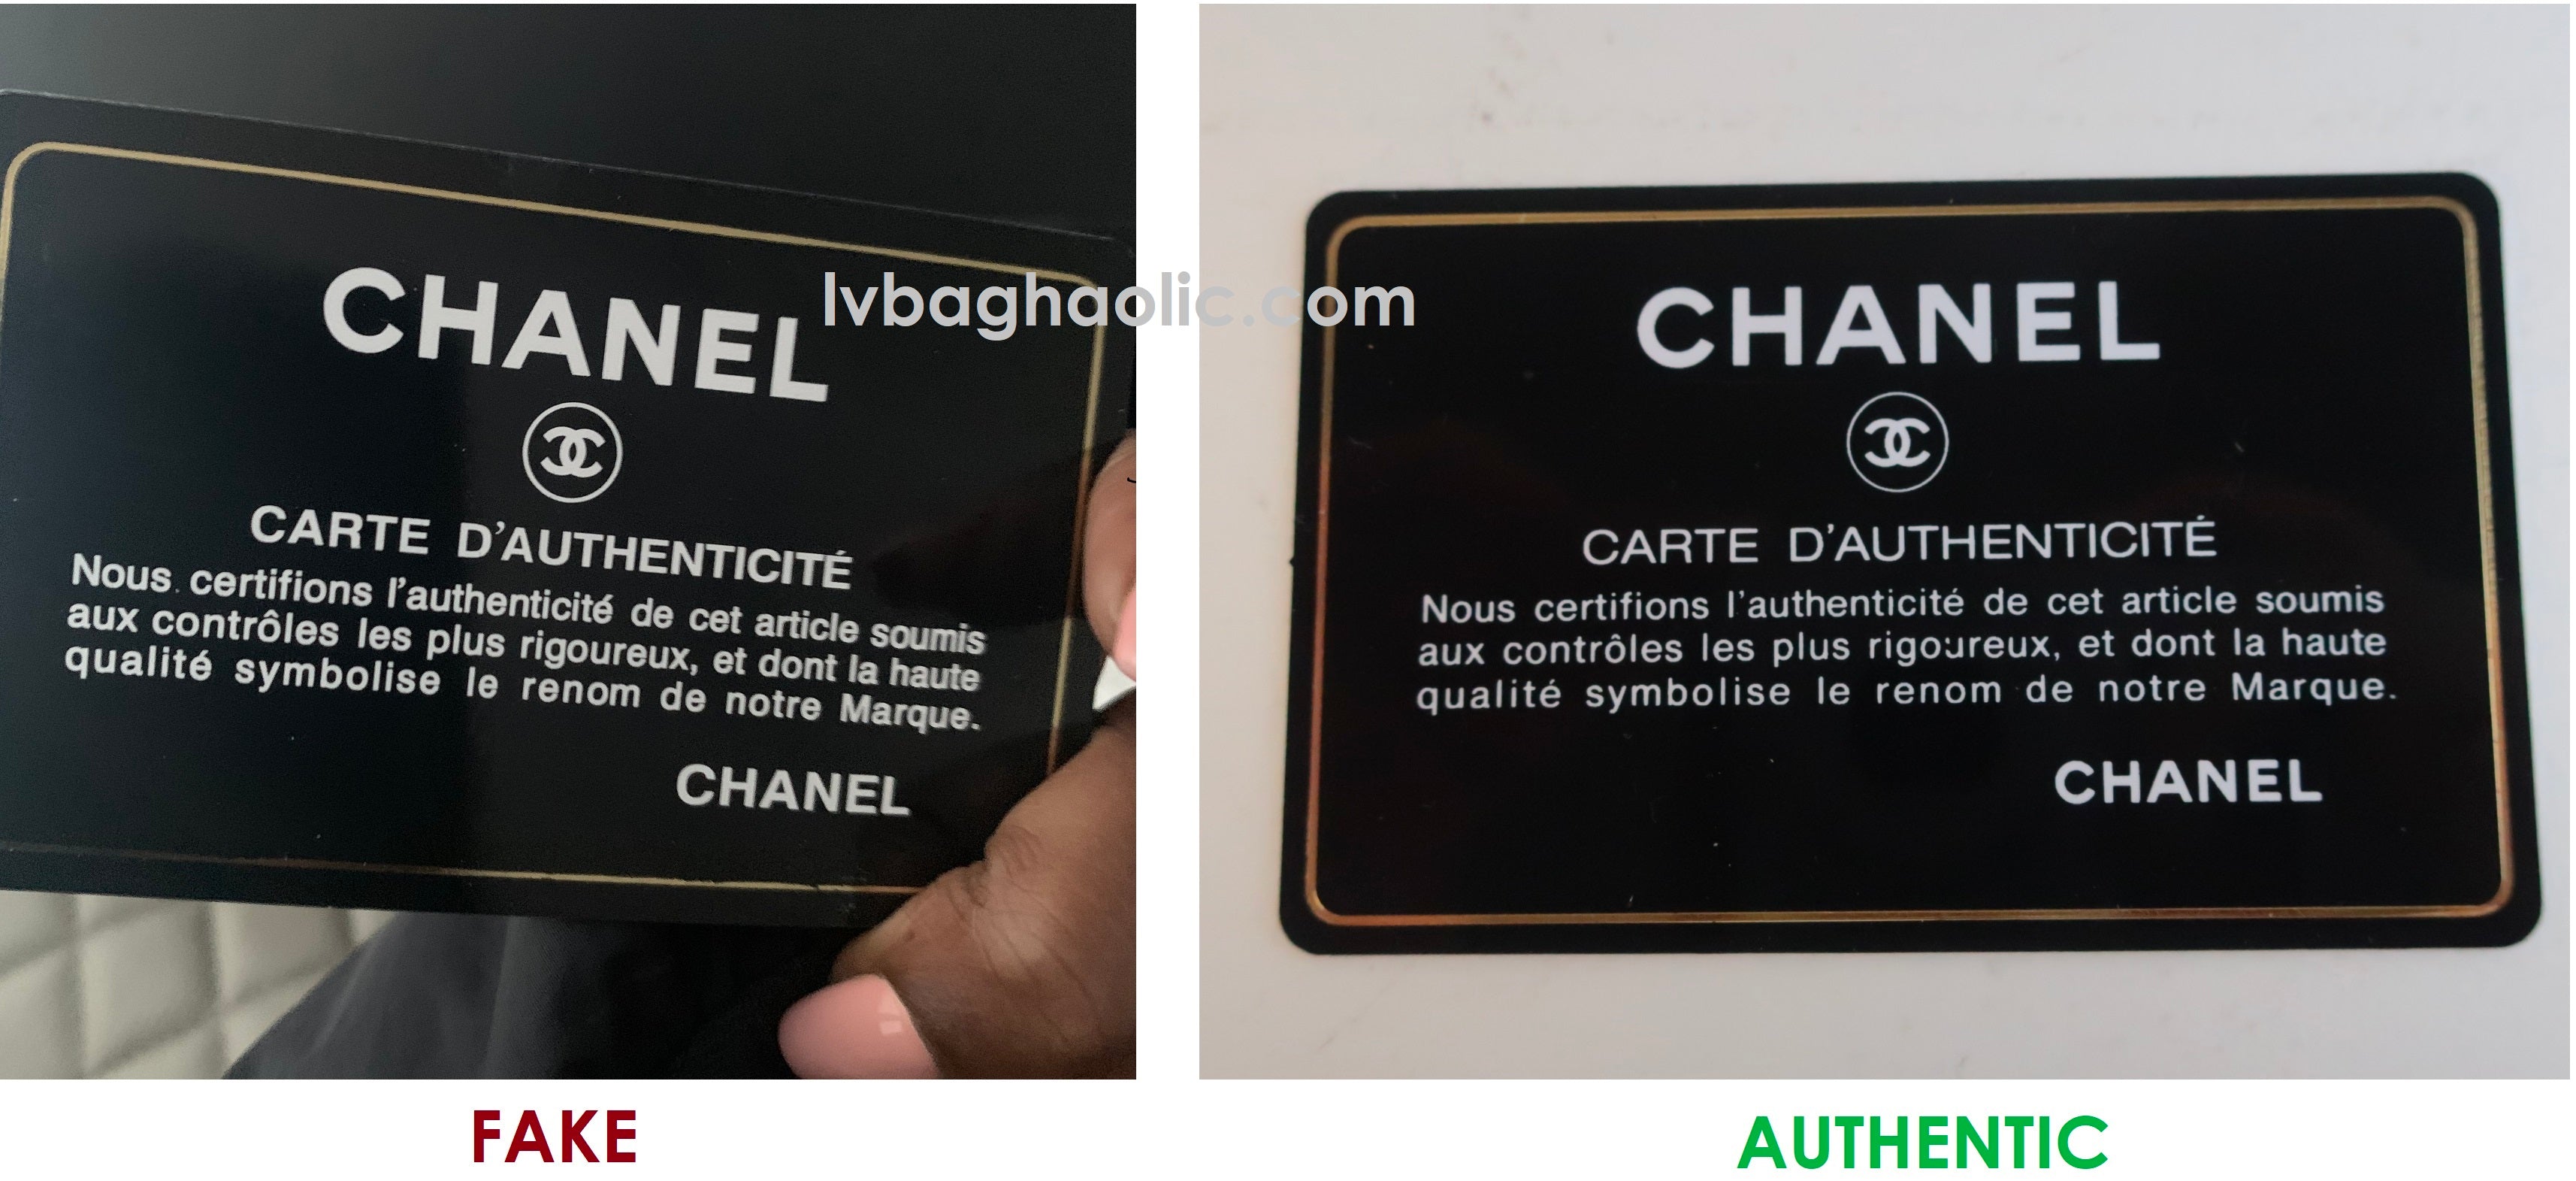 chanel authenticity card real fake comparison